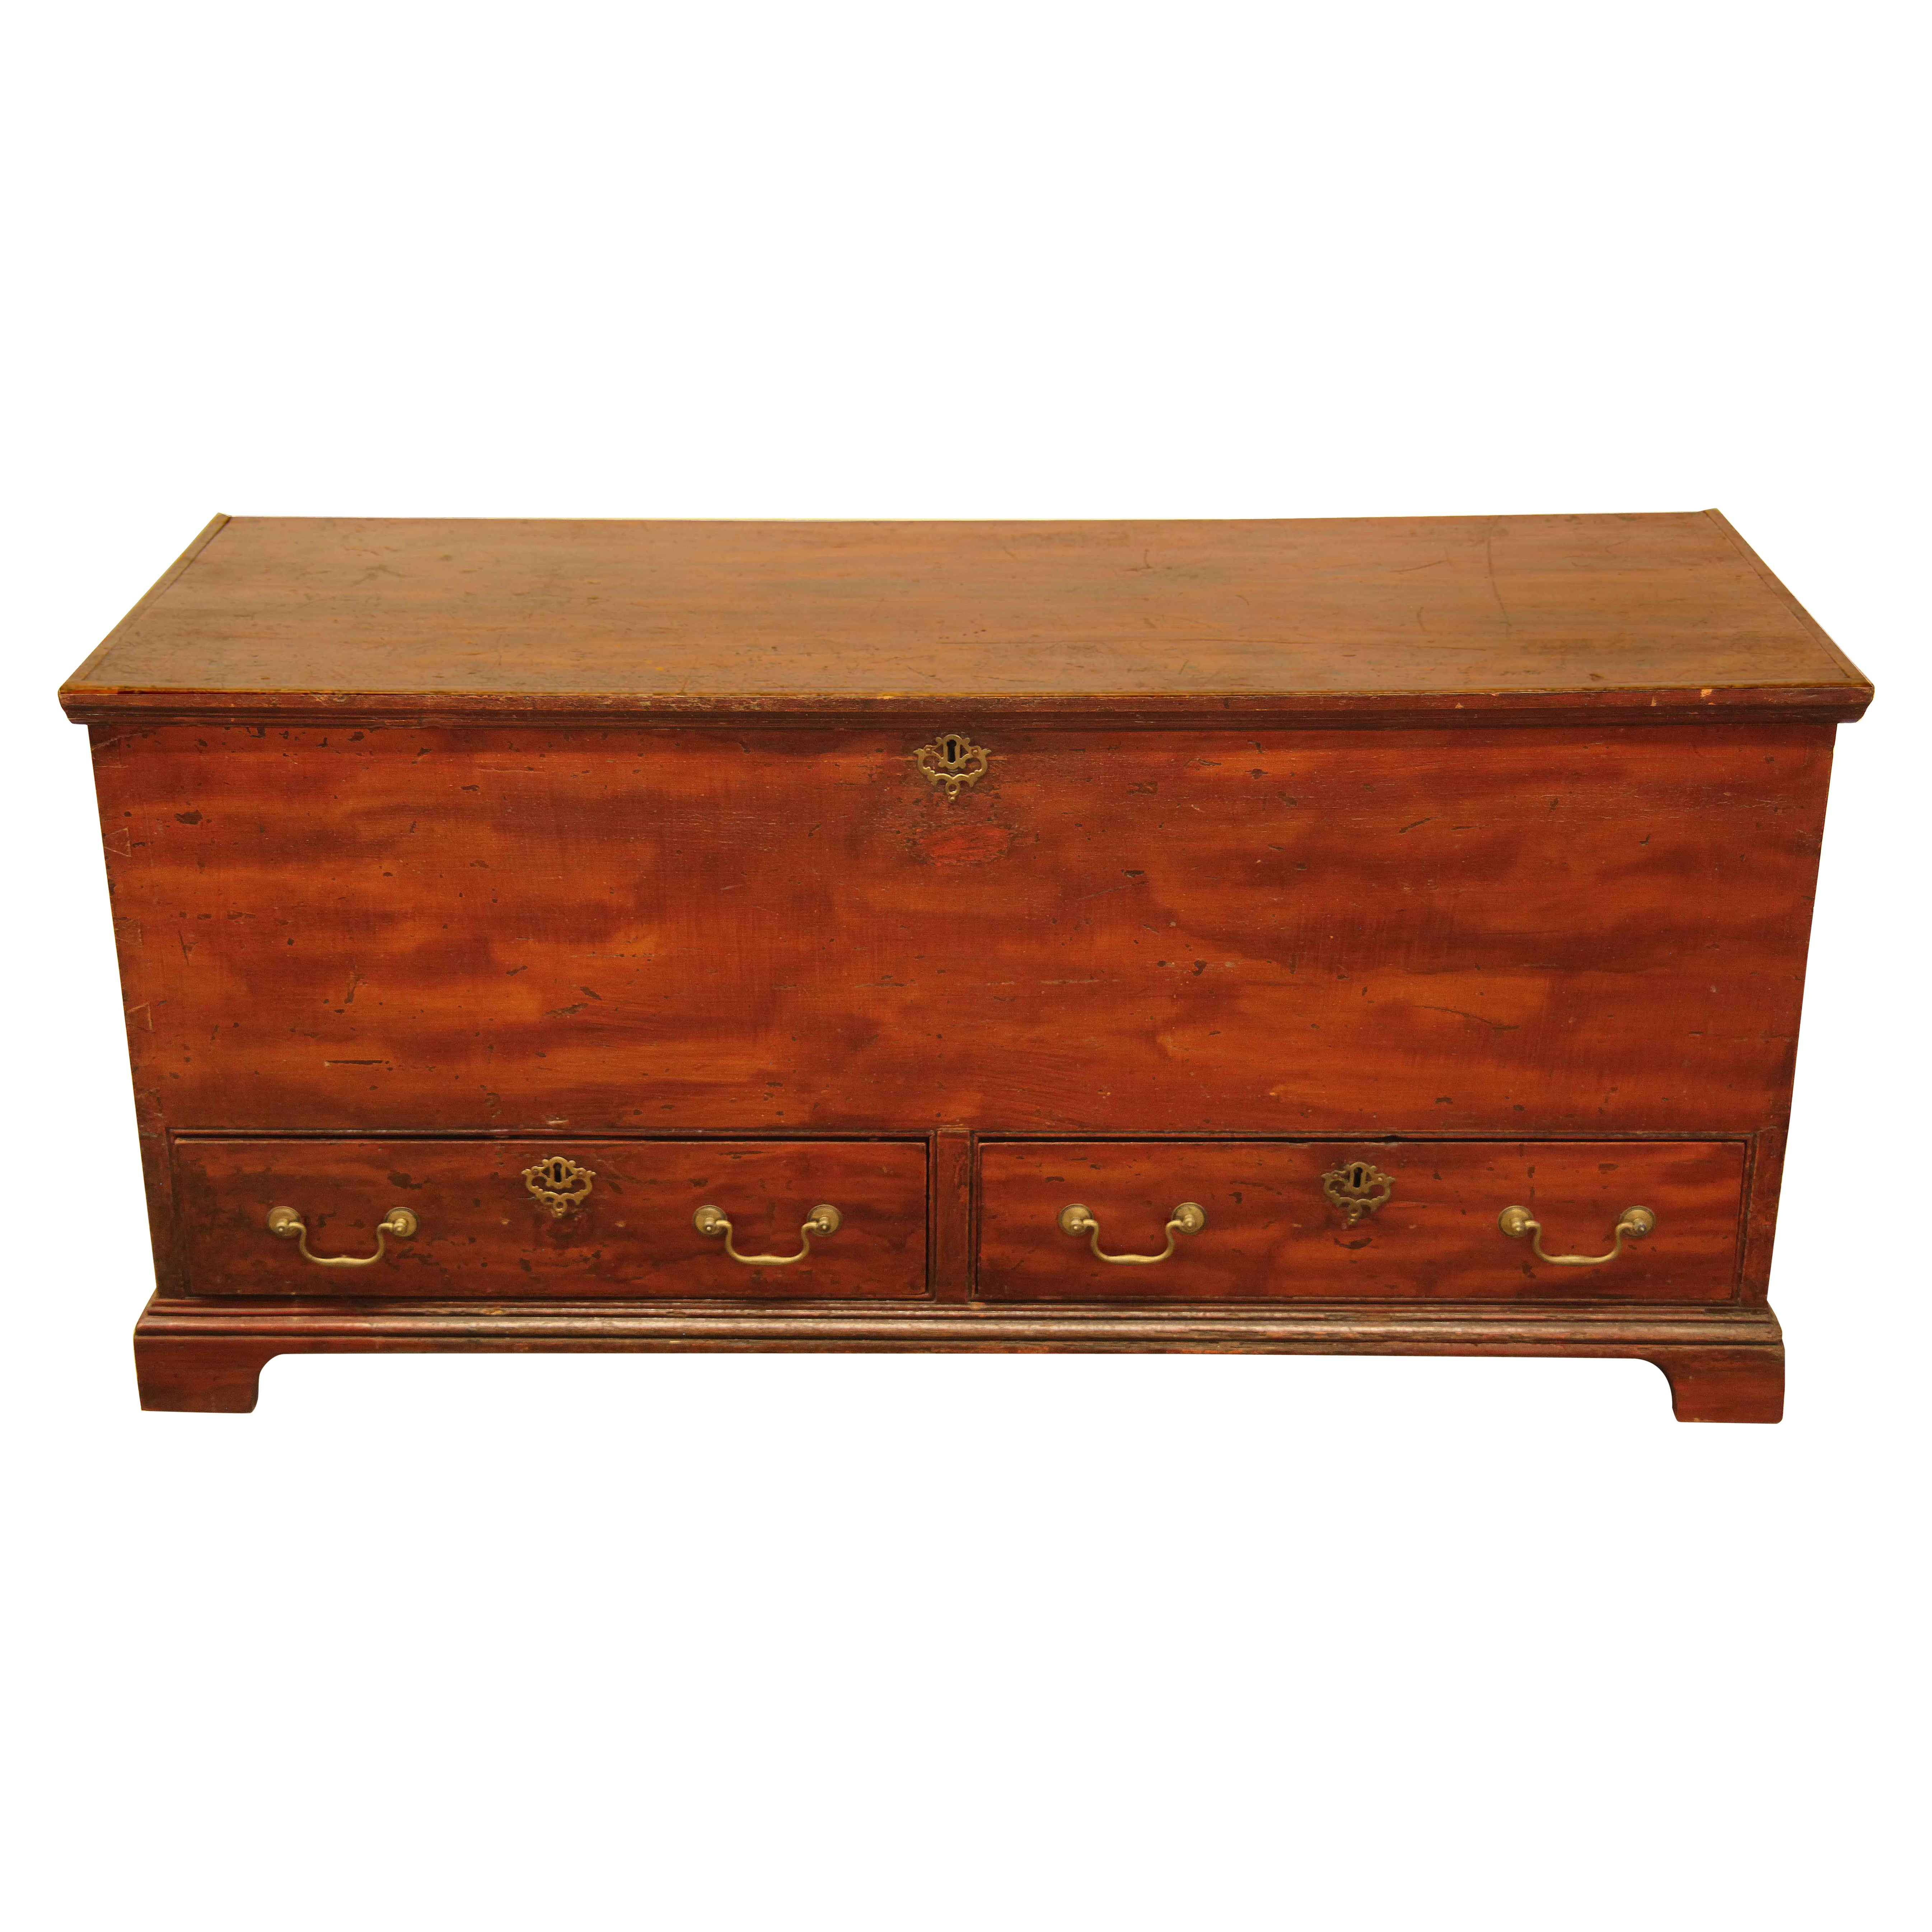 English Grain Painted Blanket Chest